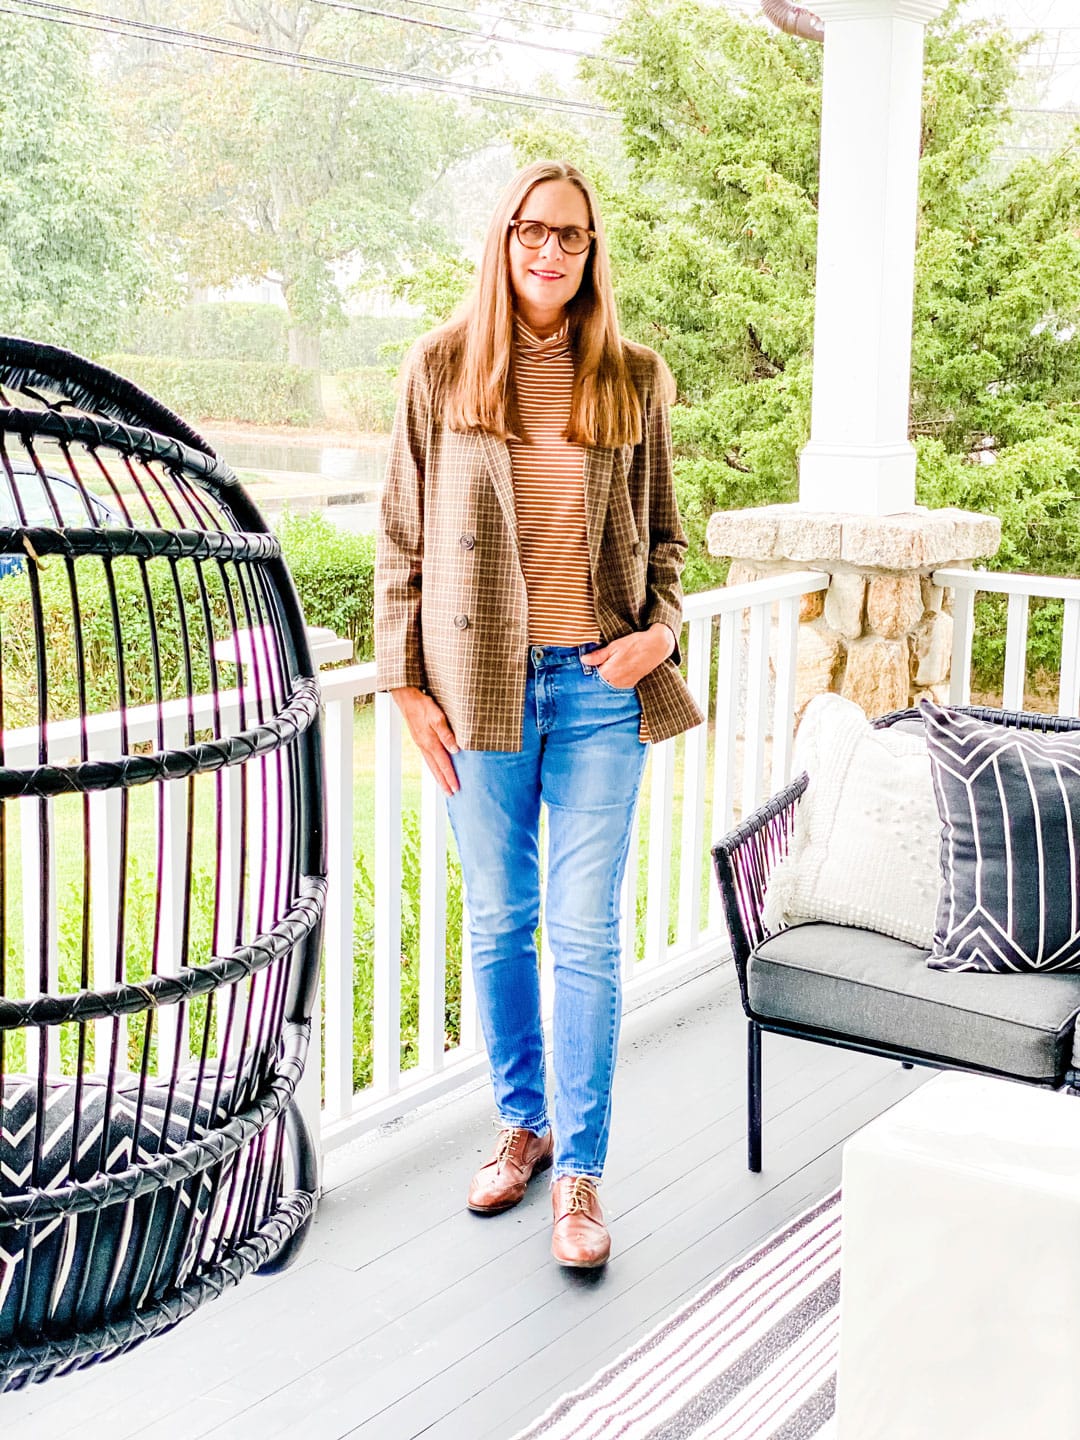 Lifestyle Blogger Annie Diamond shares her love of fall colors with fashion.